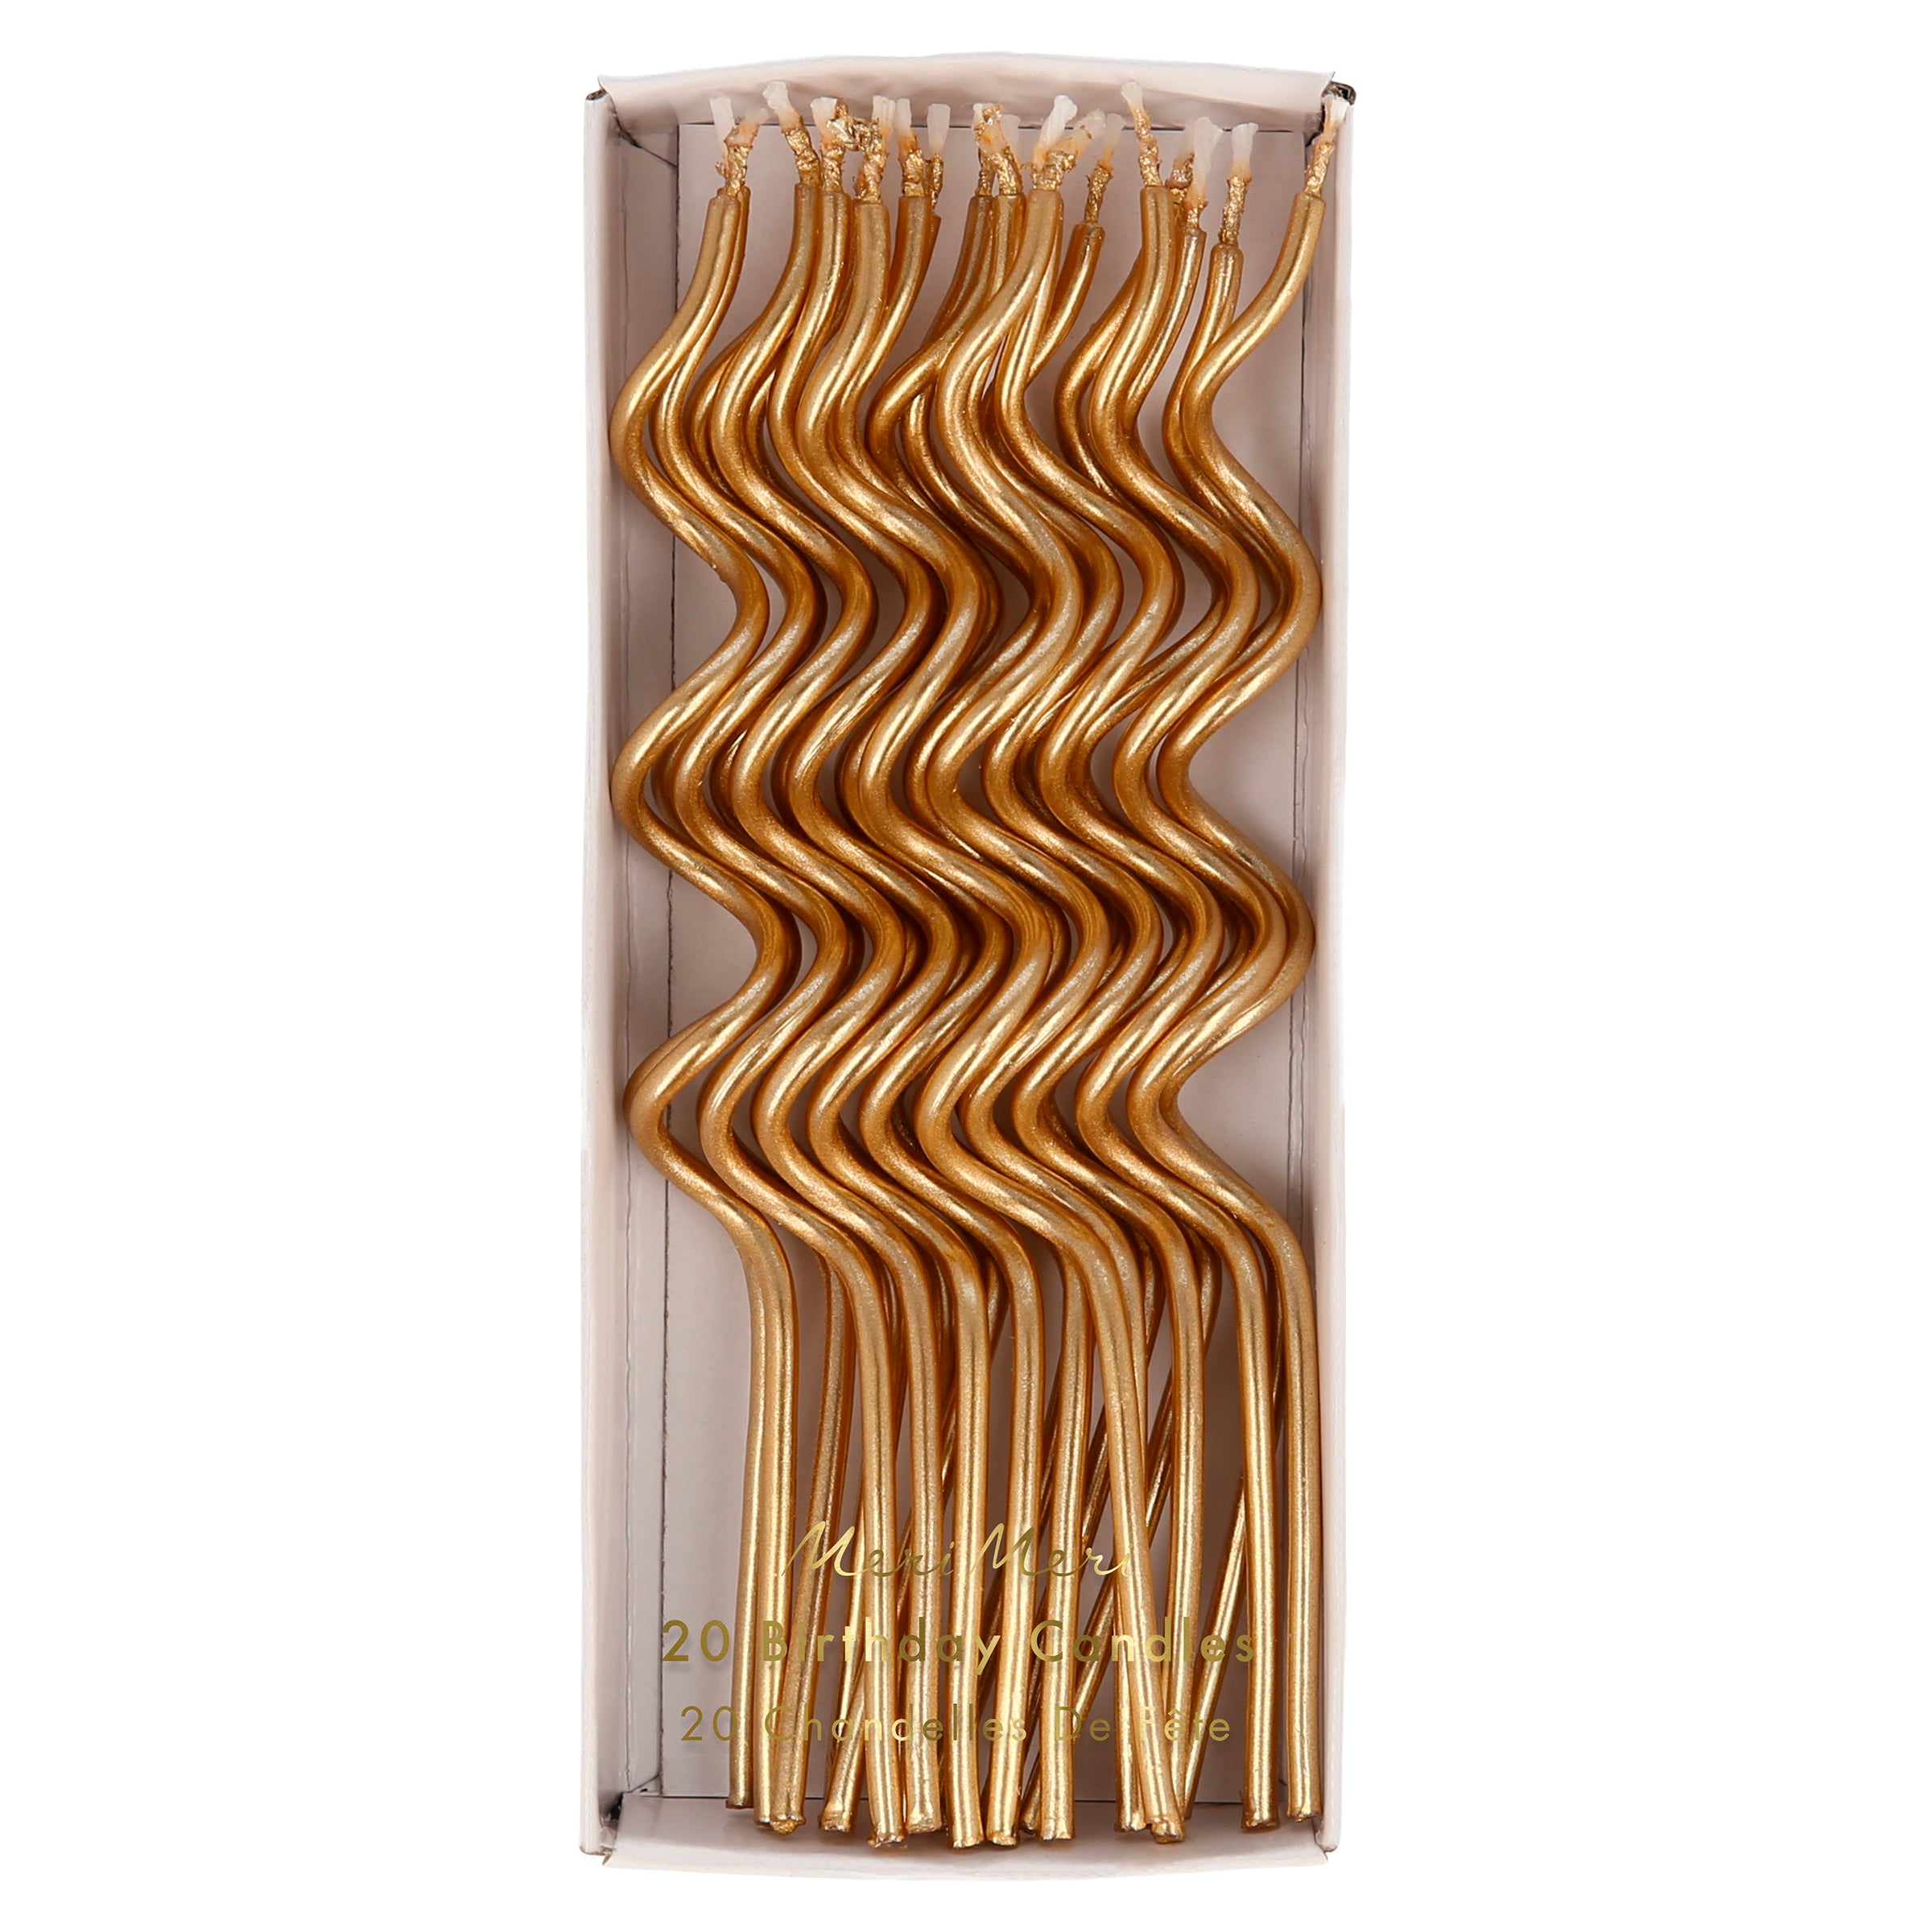 Our gold candles, with a wavy design, make great birthday cake decorations and are perfect for weddings or engagements.